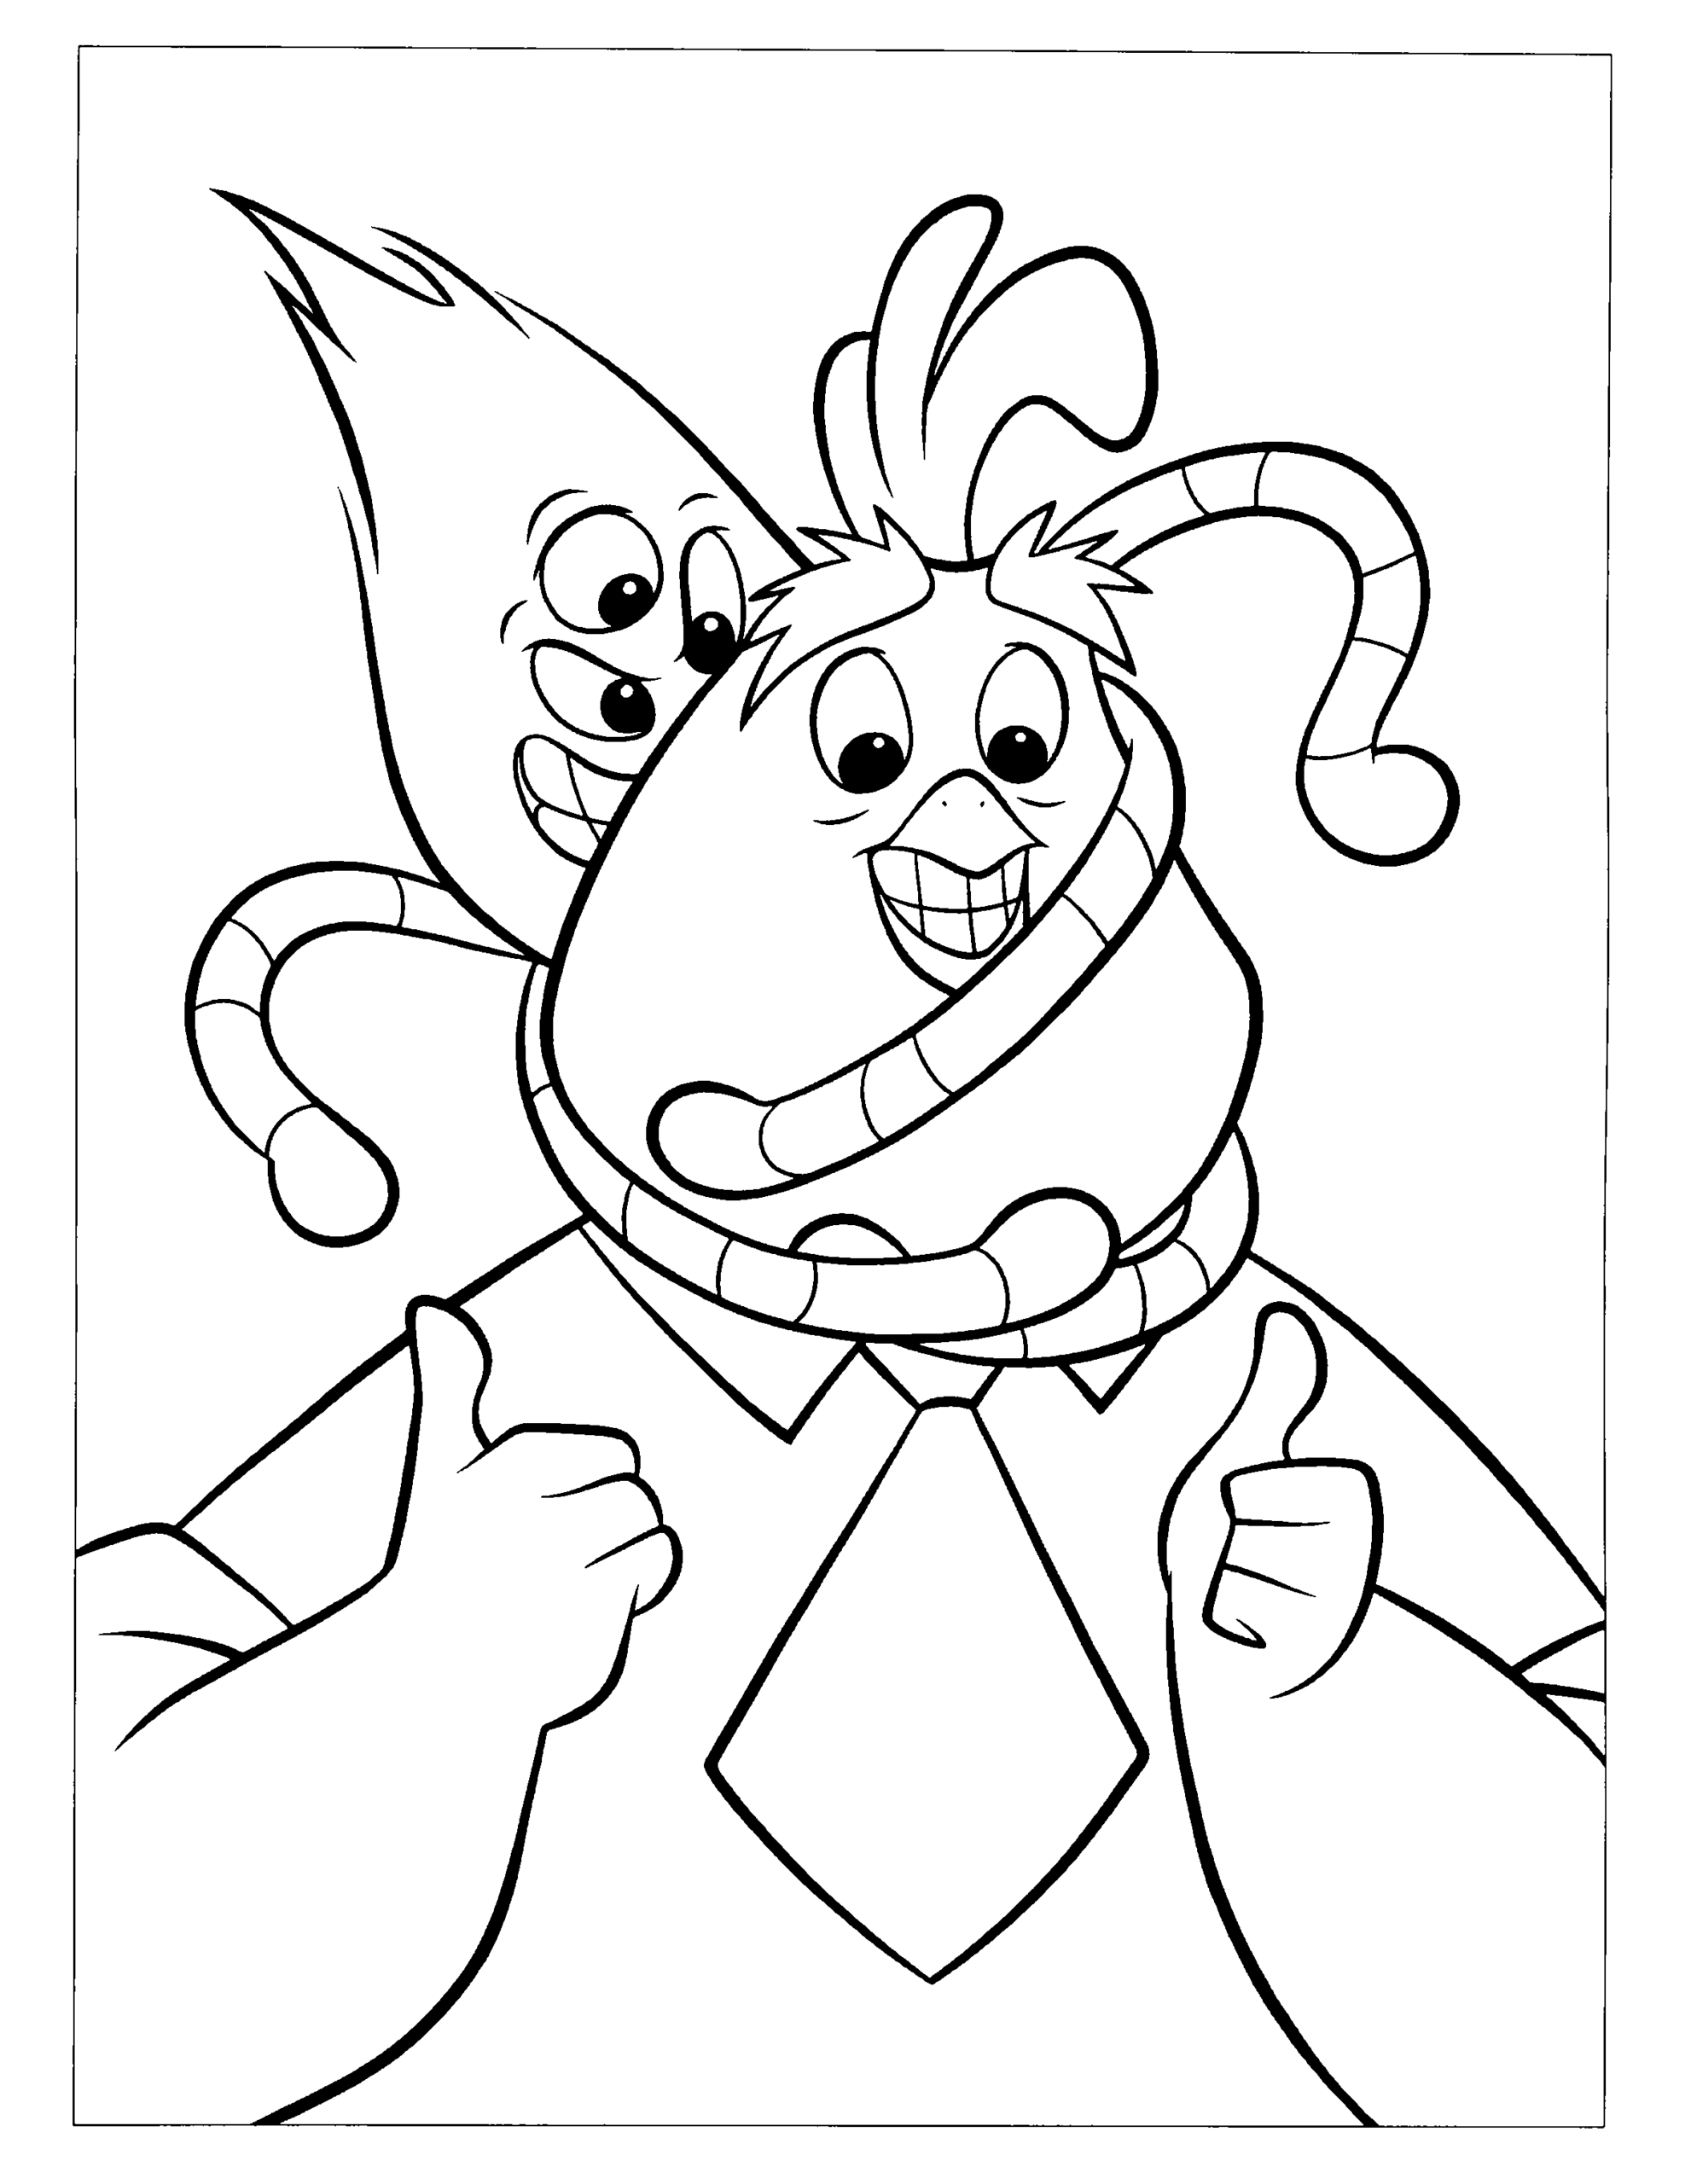 Chicken Little Coloring Pages TV Film chicken little 1 Printable 2020 02076 Coloring4free